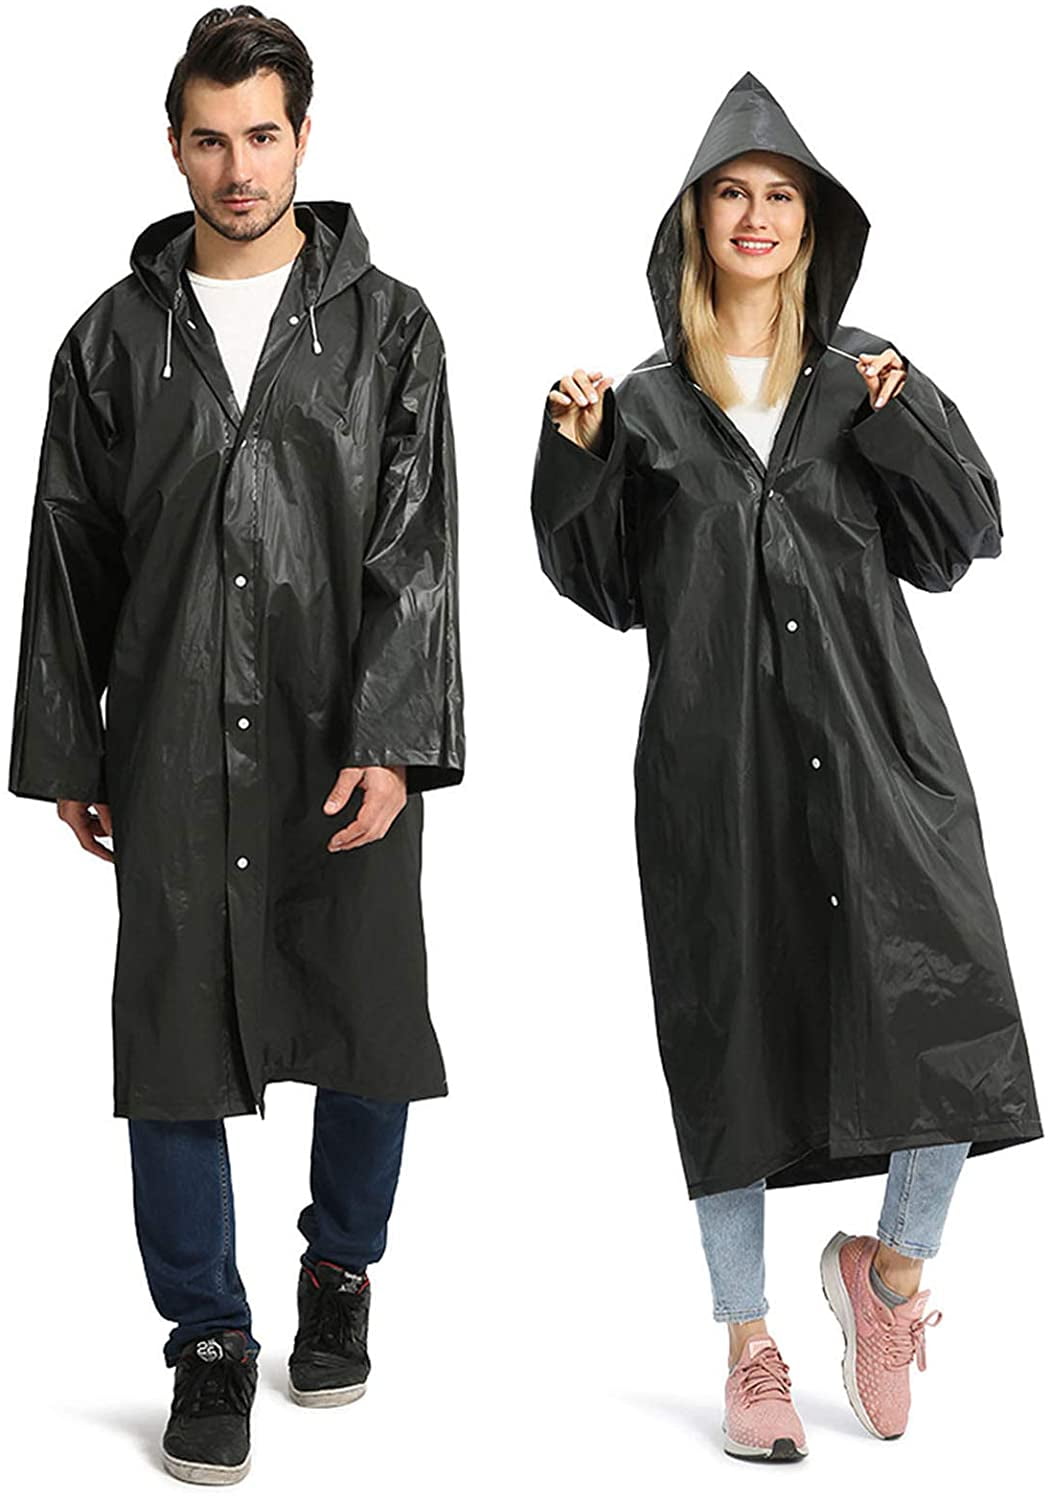 Emergency Unisex Outdoor Rainwear for Camping/Traveling/Concerts Paciffico Adult Portable Rain Poncho Black Reusable Hooded Raincoat 